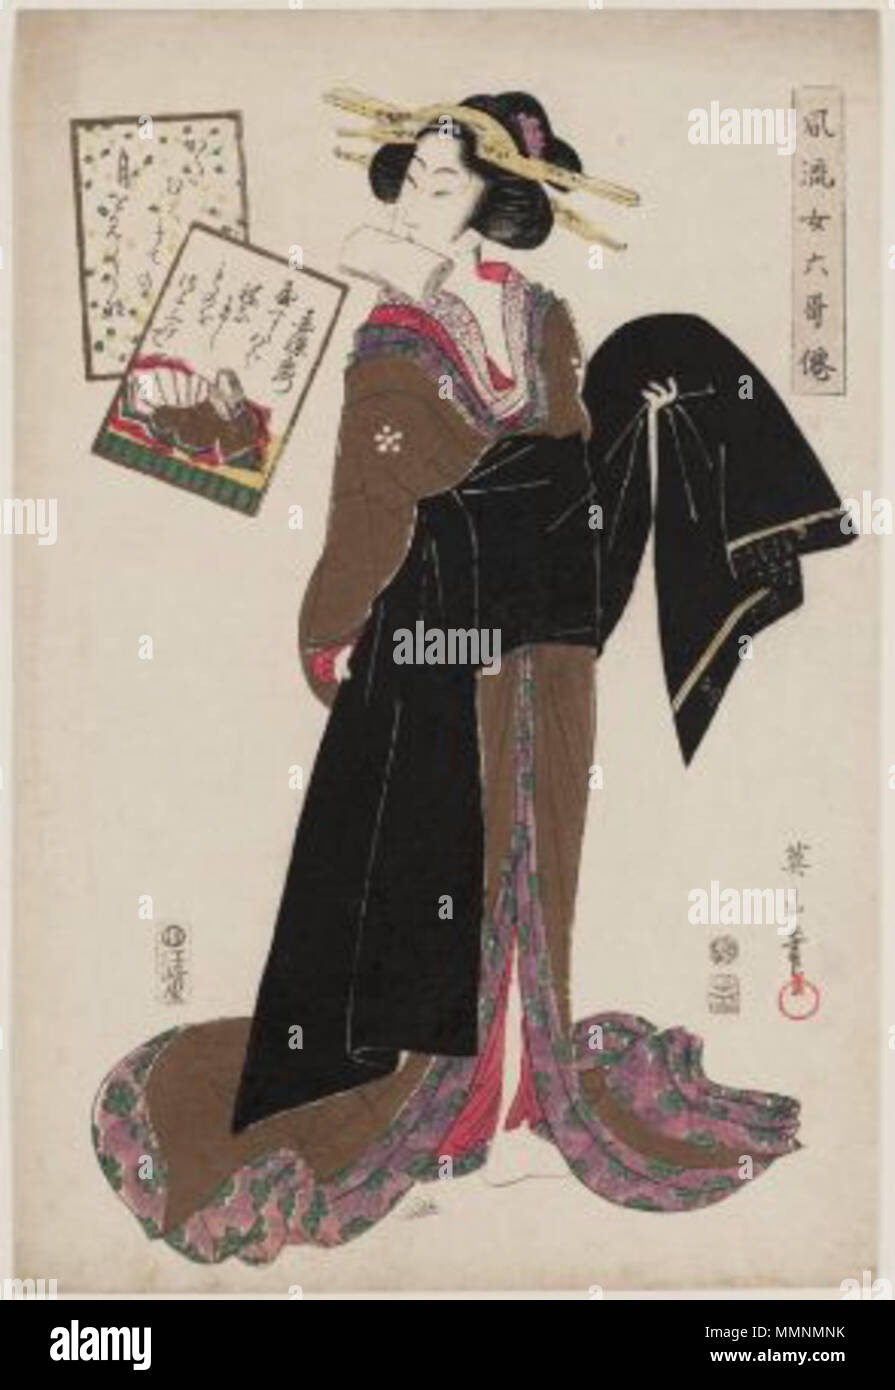 . ??ѵ??ެ?: ??????????Ѧ?ࡵ???+??????????????????? English: Akazome Emon, Heian era writer and lady-in-waiting, depicted here in a 19th Woodblock print (nishiki-e) print; ink and color on paper. Akazome Emon 1811 Stock Photo